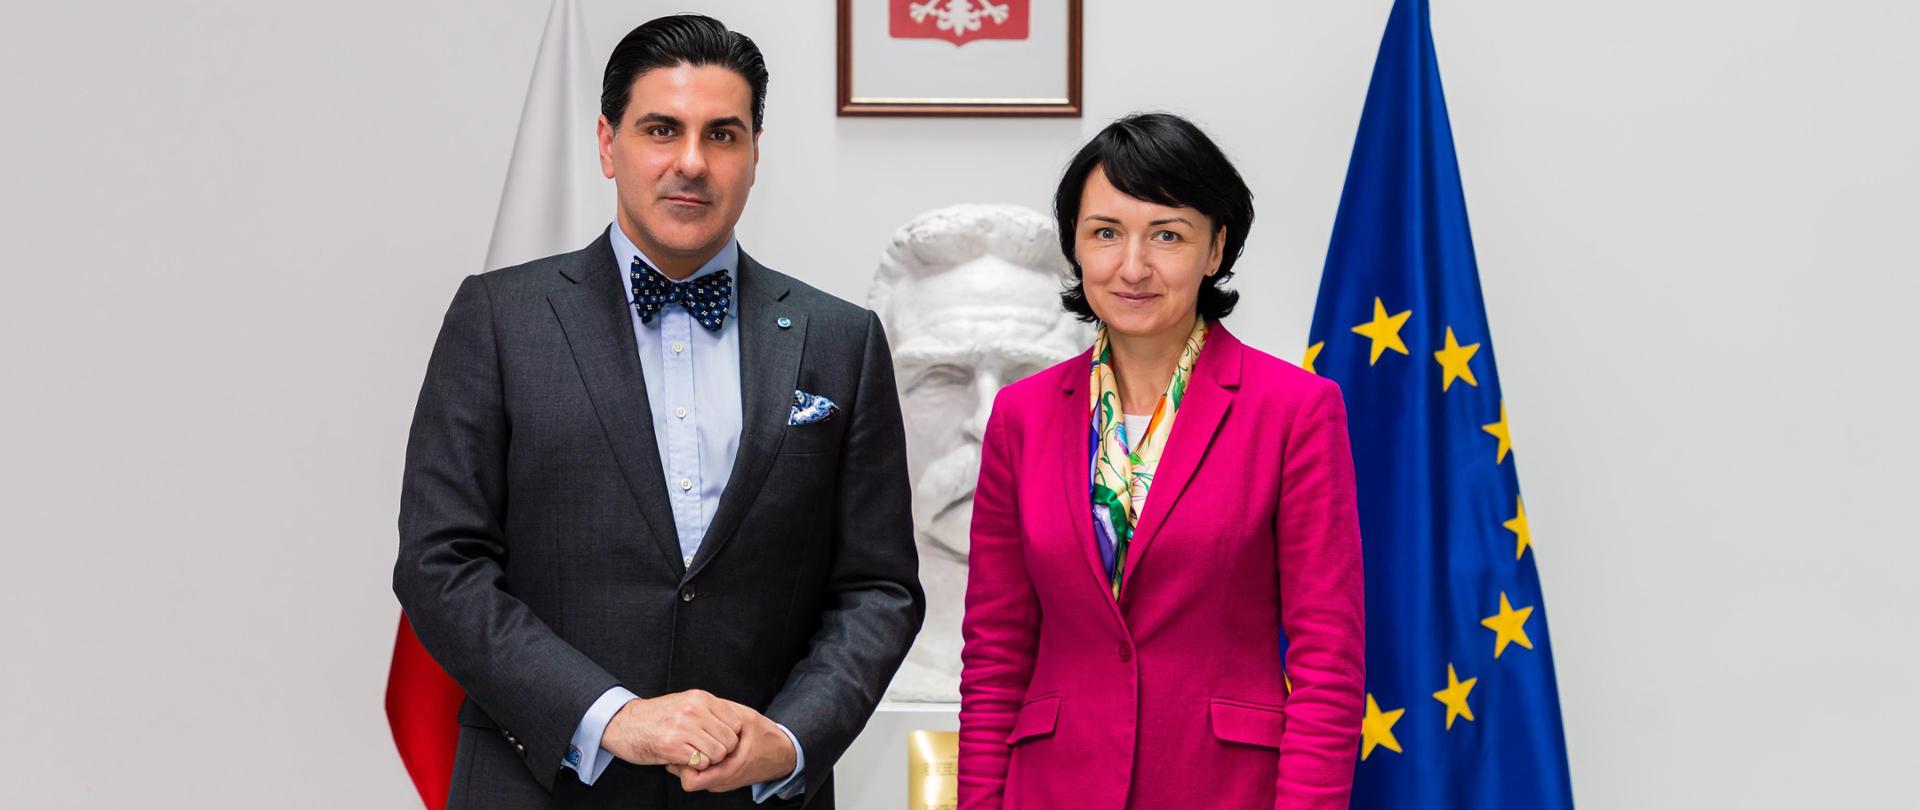 Undersecretary of State Henryka Moscicka-Dendys with the Chancellor of the International Criminal Court in The Hague, Osvaldo Zavala Giler against the background of the Polish and EU flags